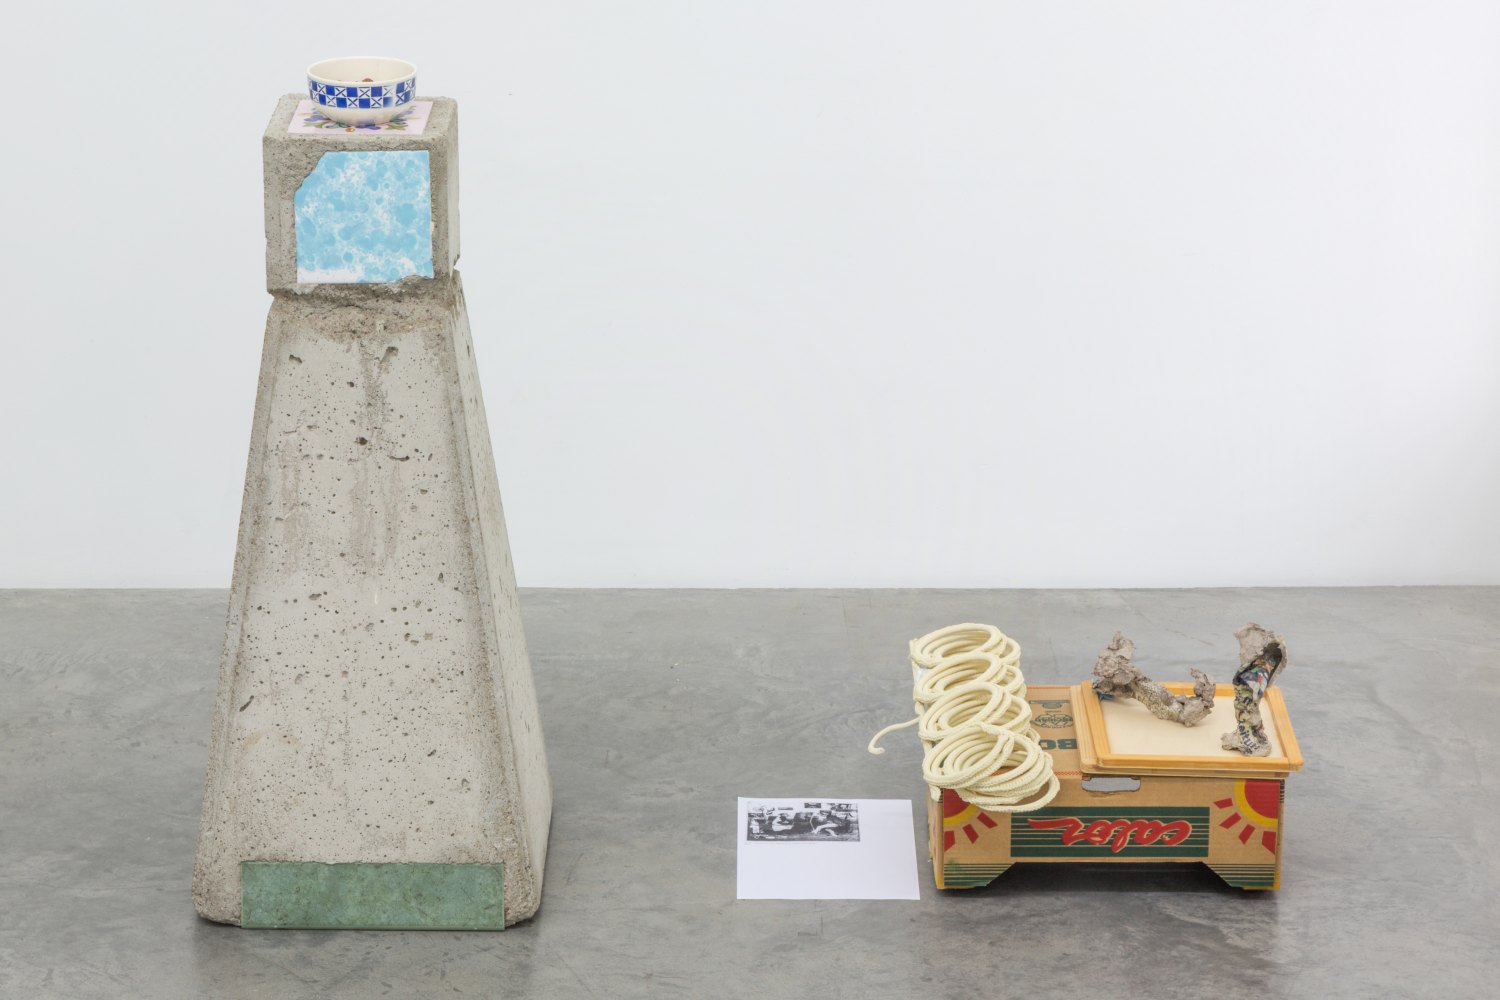 Manfred Pernice mit Martin Städeli Abbruch (d. Bez.), 2005-2015    Concrete, tiles, one bowl, snack mix, cardboard case, 1 bottle holder, 2 jigsaw puzzle borders, 2 papier-mache objects, 1 synthetic butterfly, 1 paper copy,  97 × 125 × 47 cm, dimensions variabel   